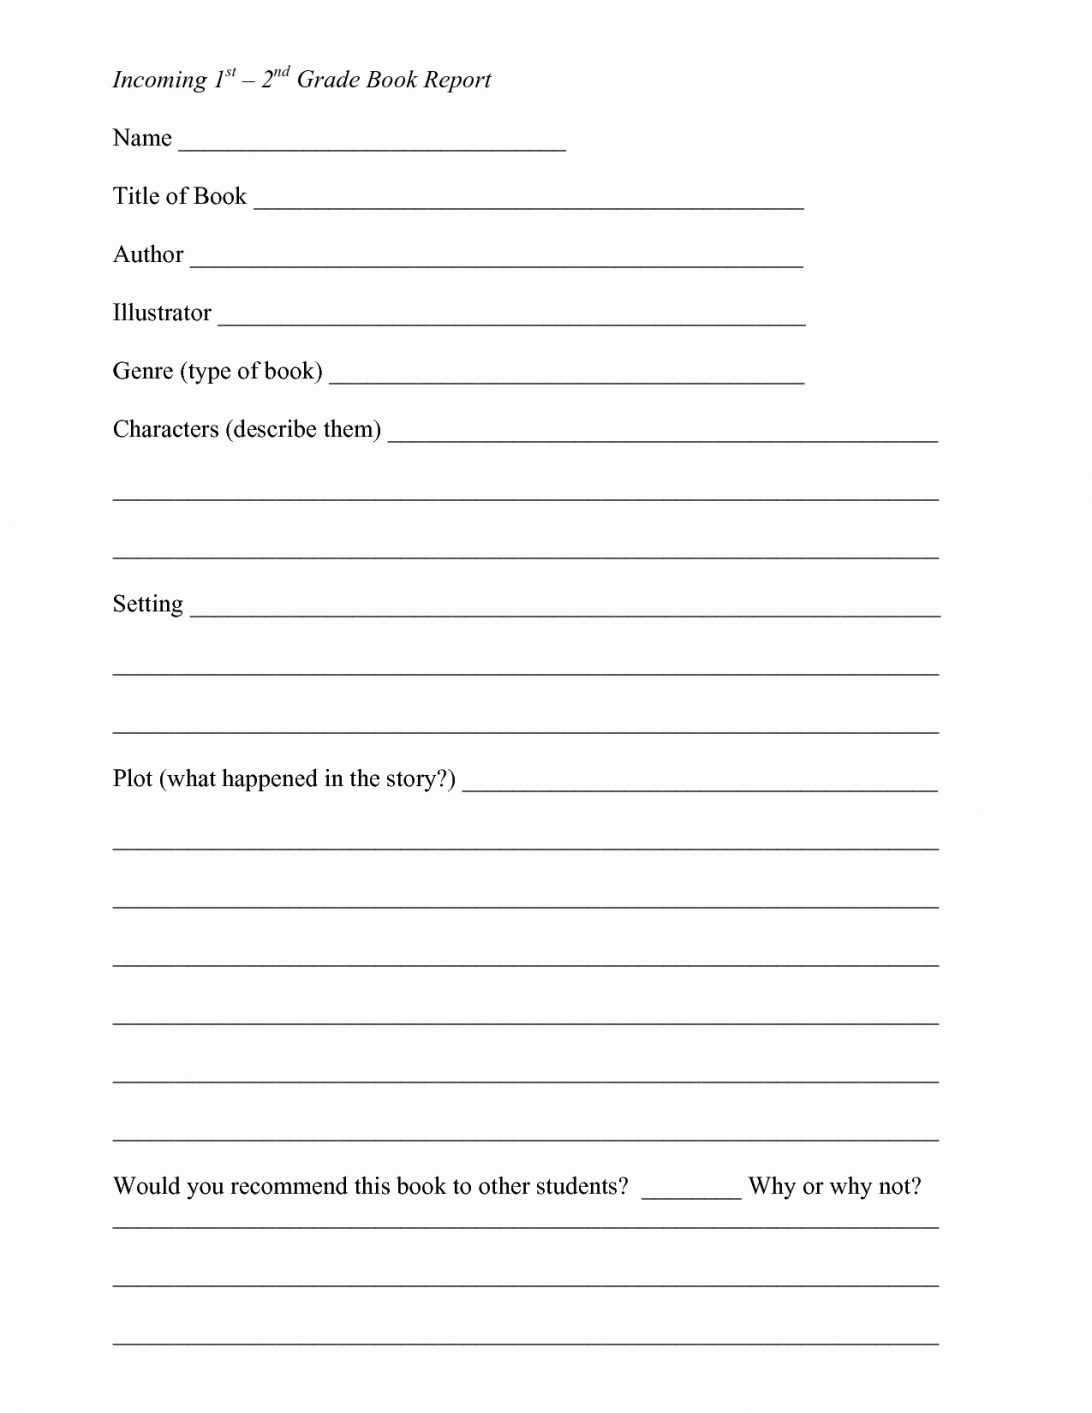 Fiction Book Report Template 6Th Grade For 7Th Graders Pdf Pertaining To Book Report Template 6Th Grade